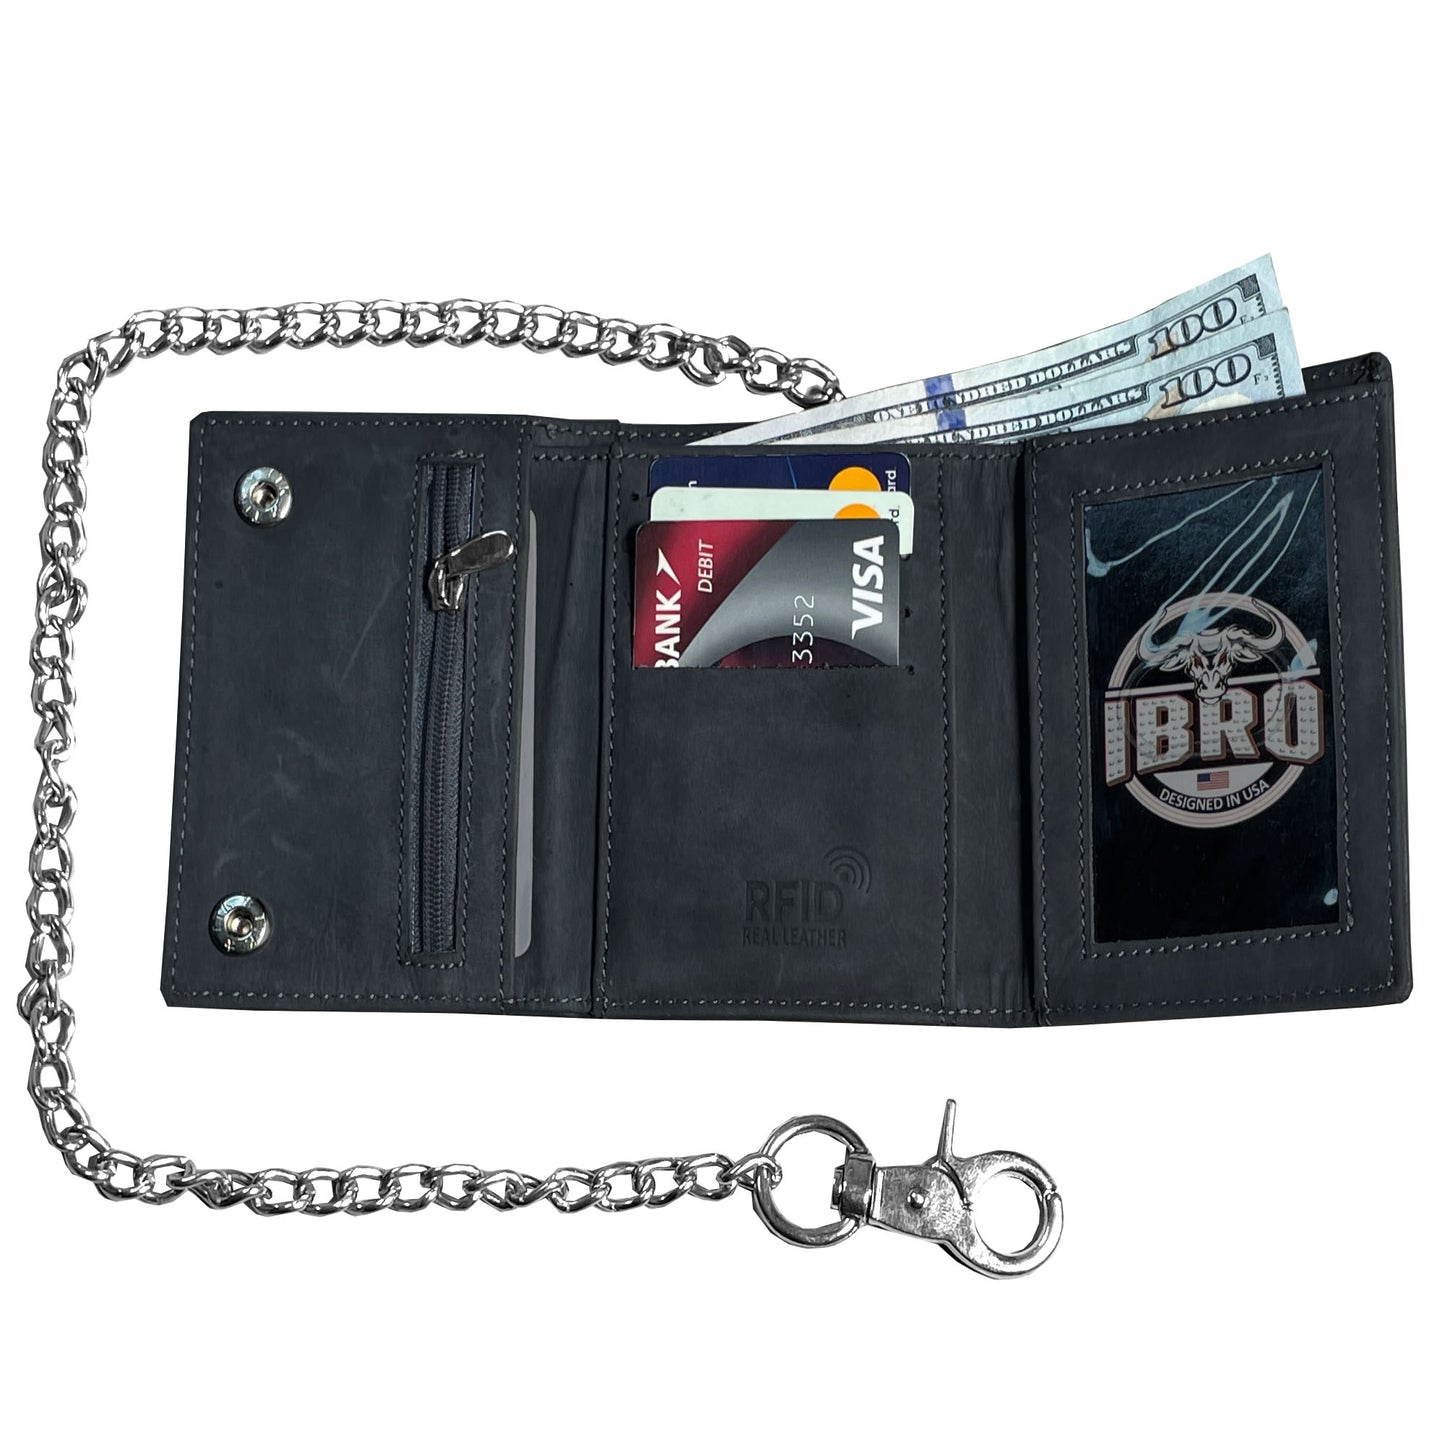 IBRO Motorcycle Biker Trifold Chain Wallet for Men Crazy Horse Grey